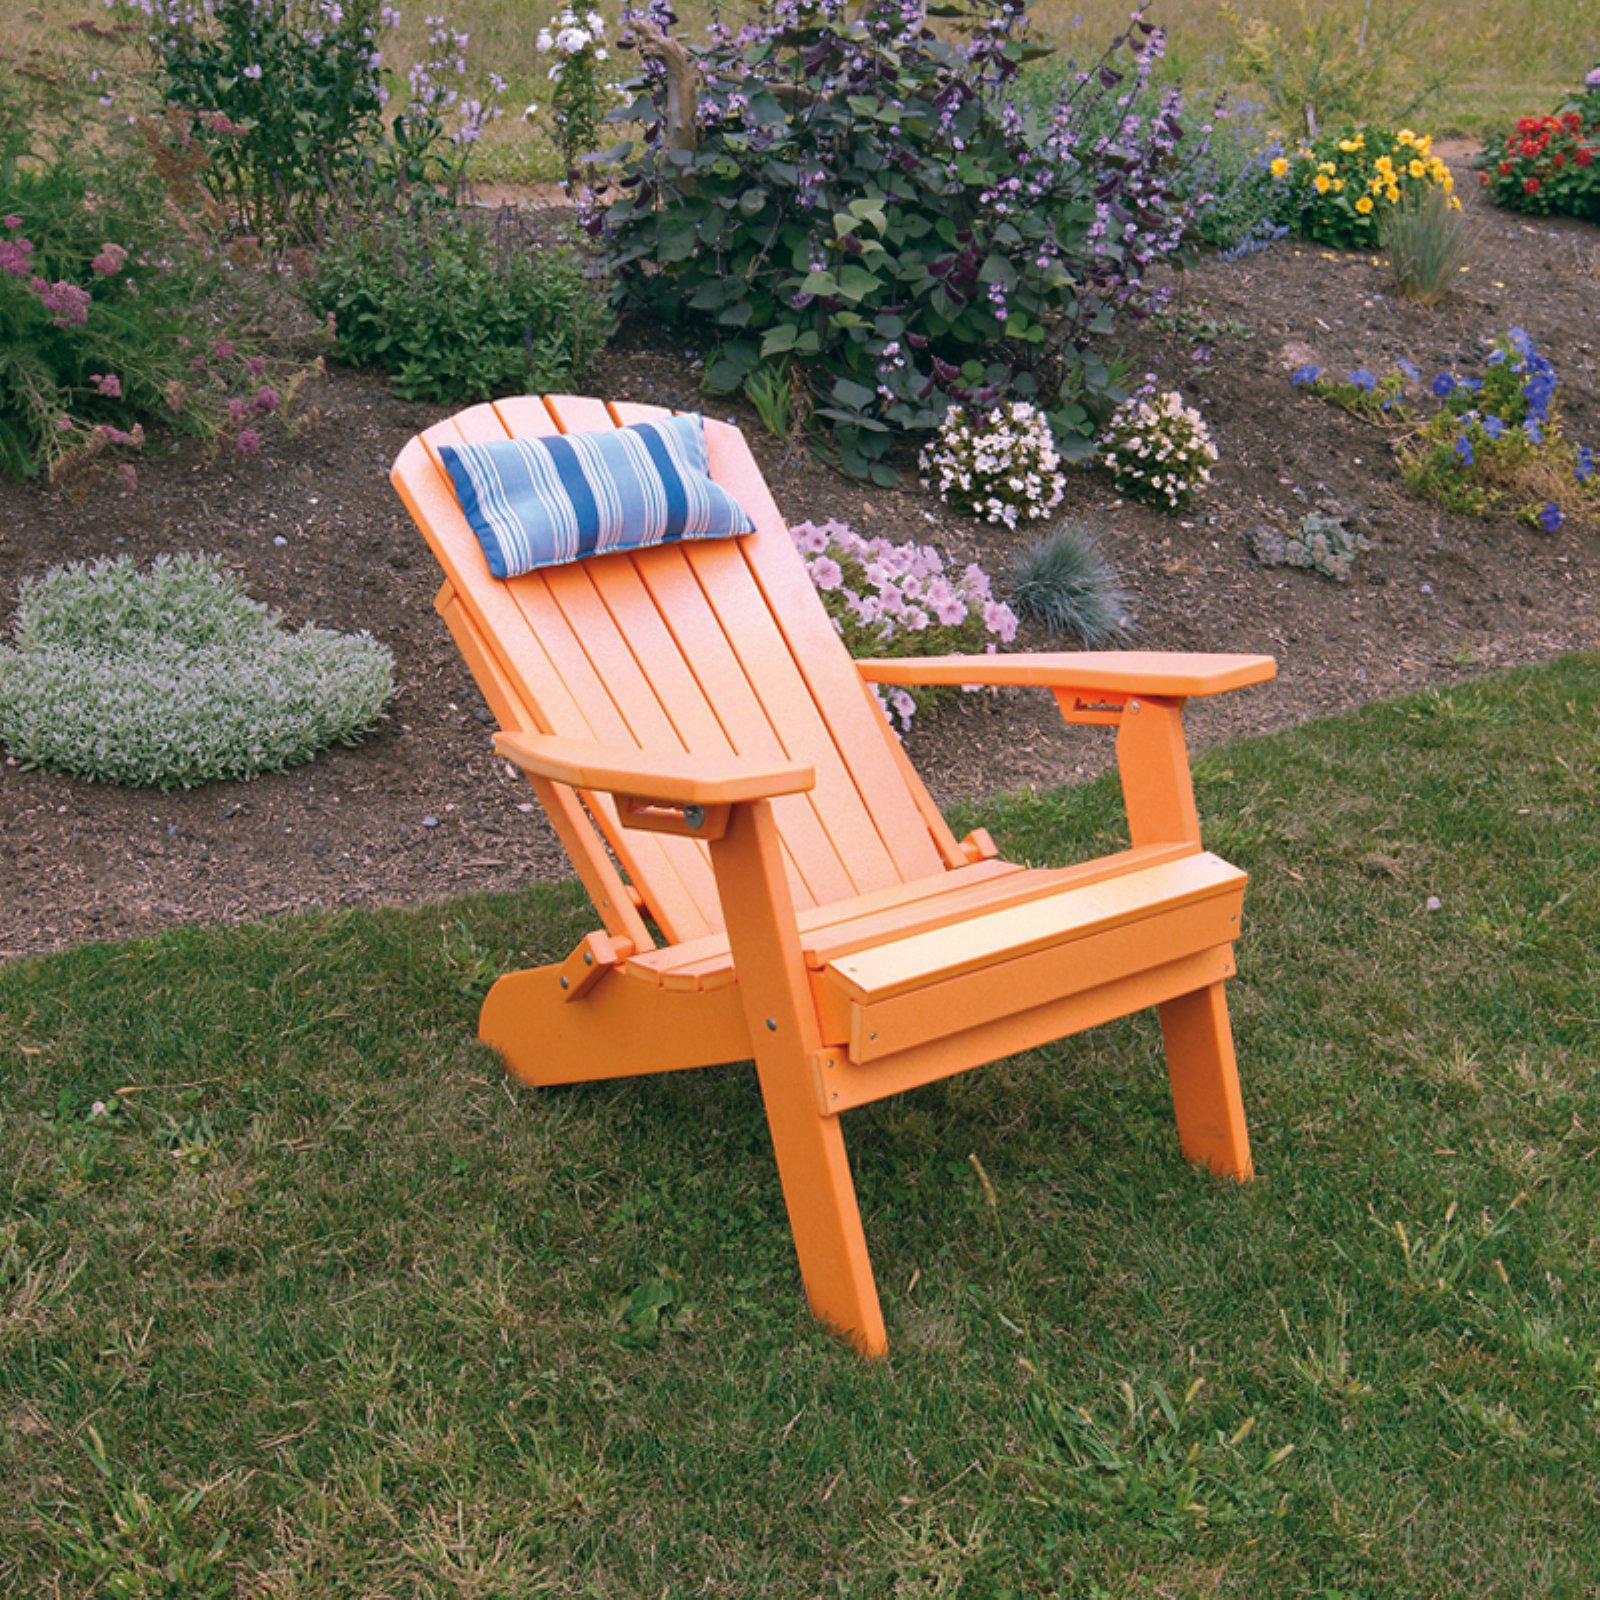 A &amp; L Furniture Fanback Recycled Plastic Folding And Reclining Adirondack Chair - image 4 of 6